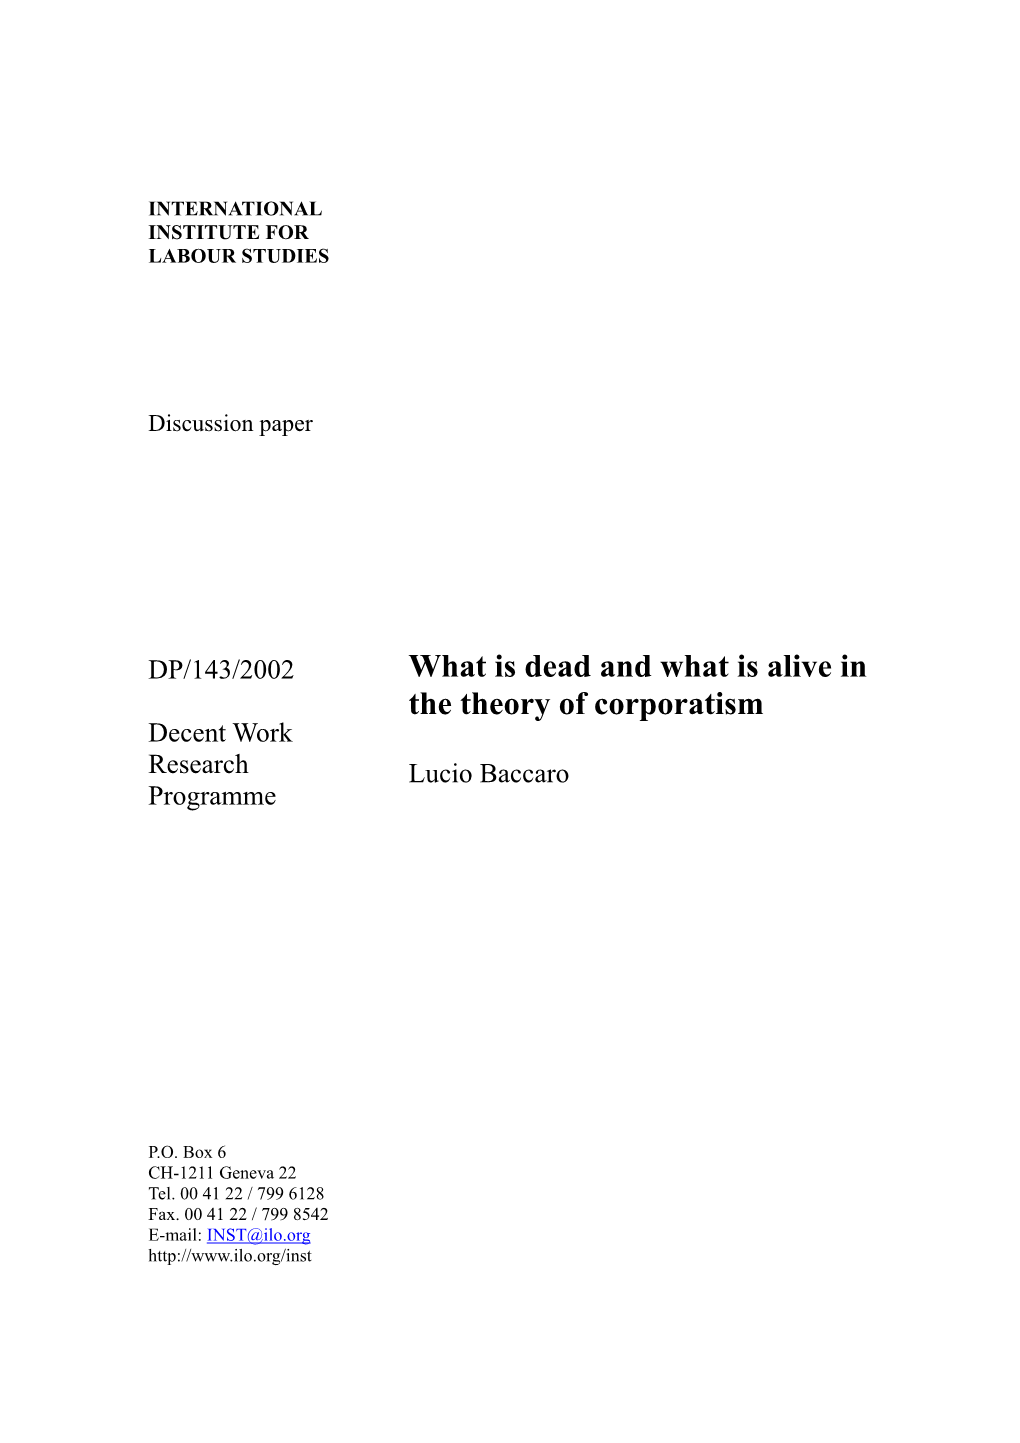 What Is Dead and What Is Alive in the Theory of Corporatism Decent Work Research Lucio Baccaro Programme